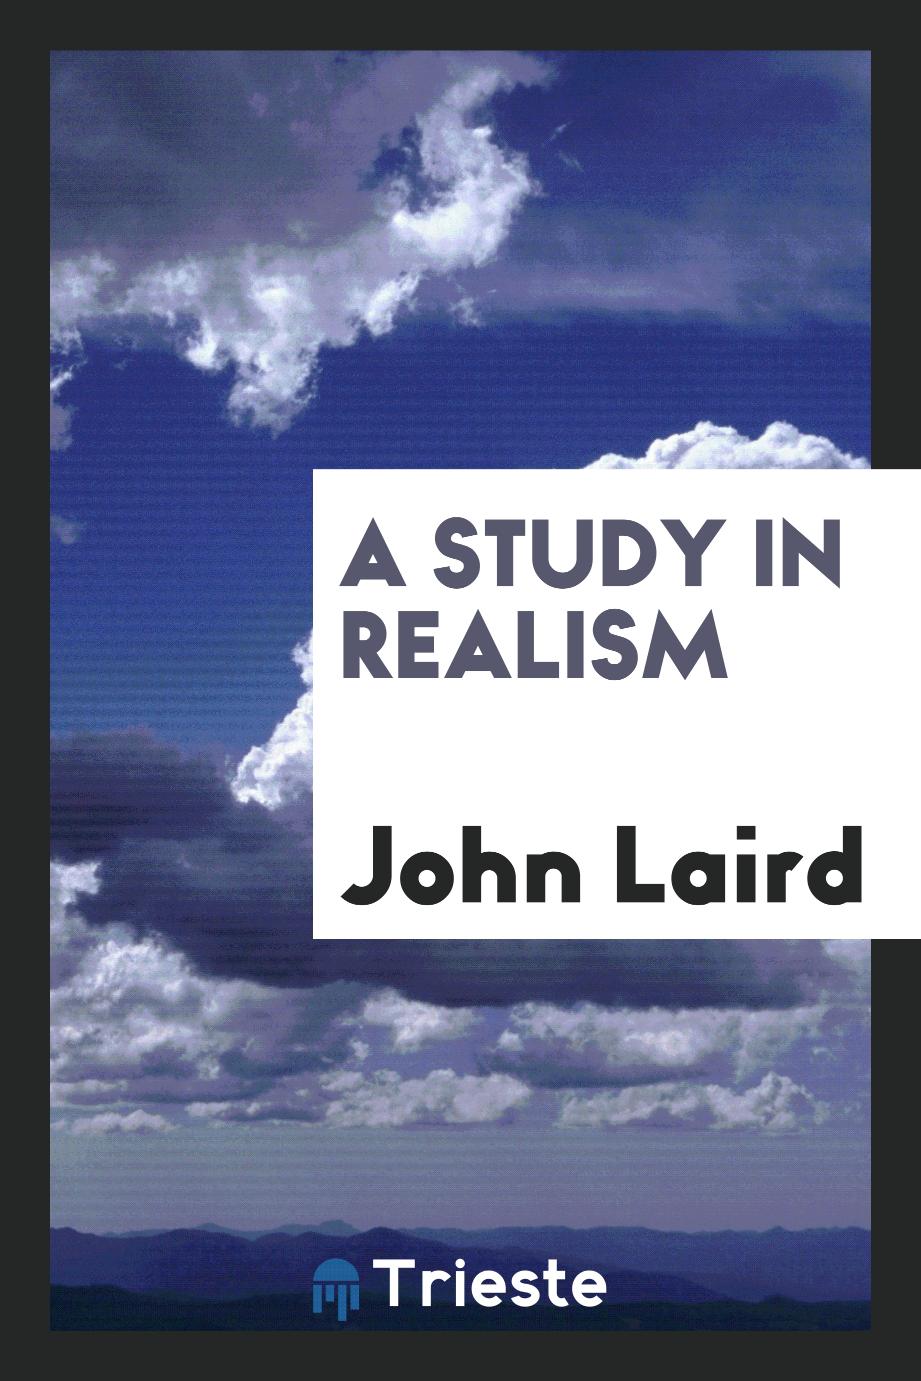 John Laird - A study in realism